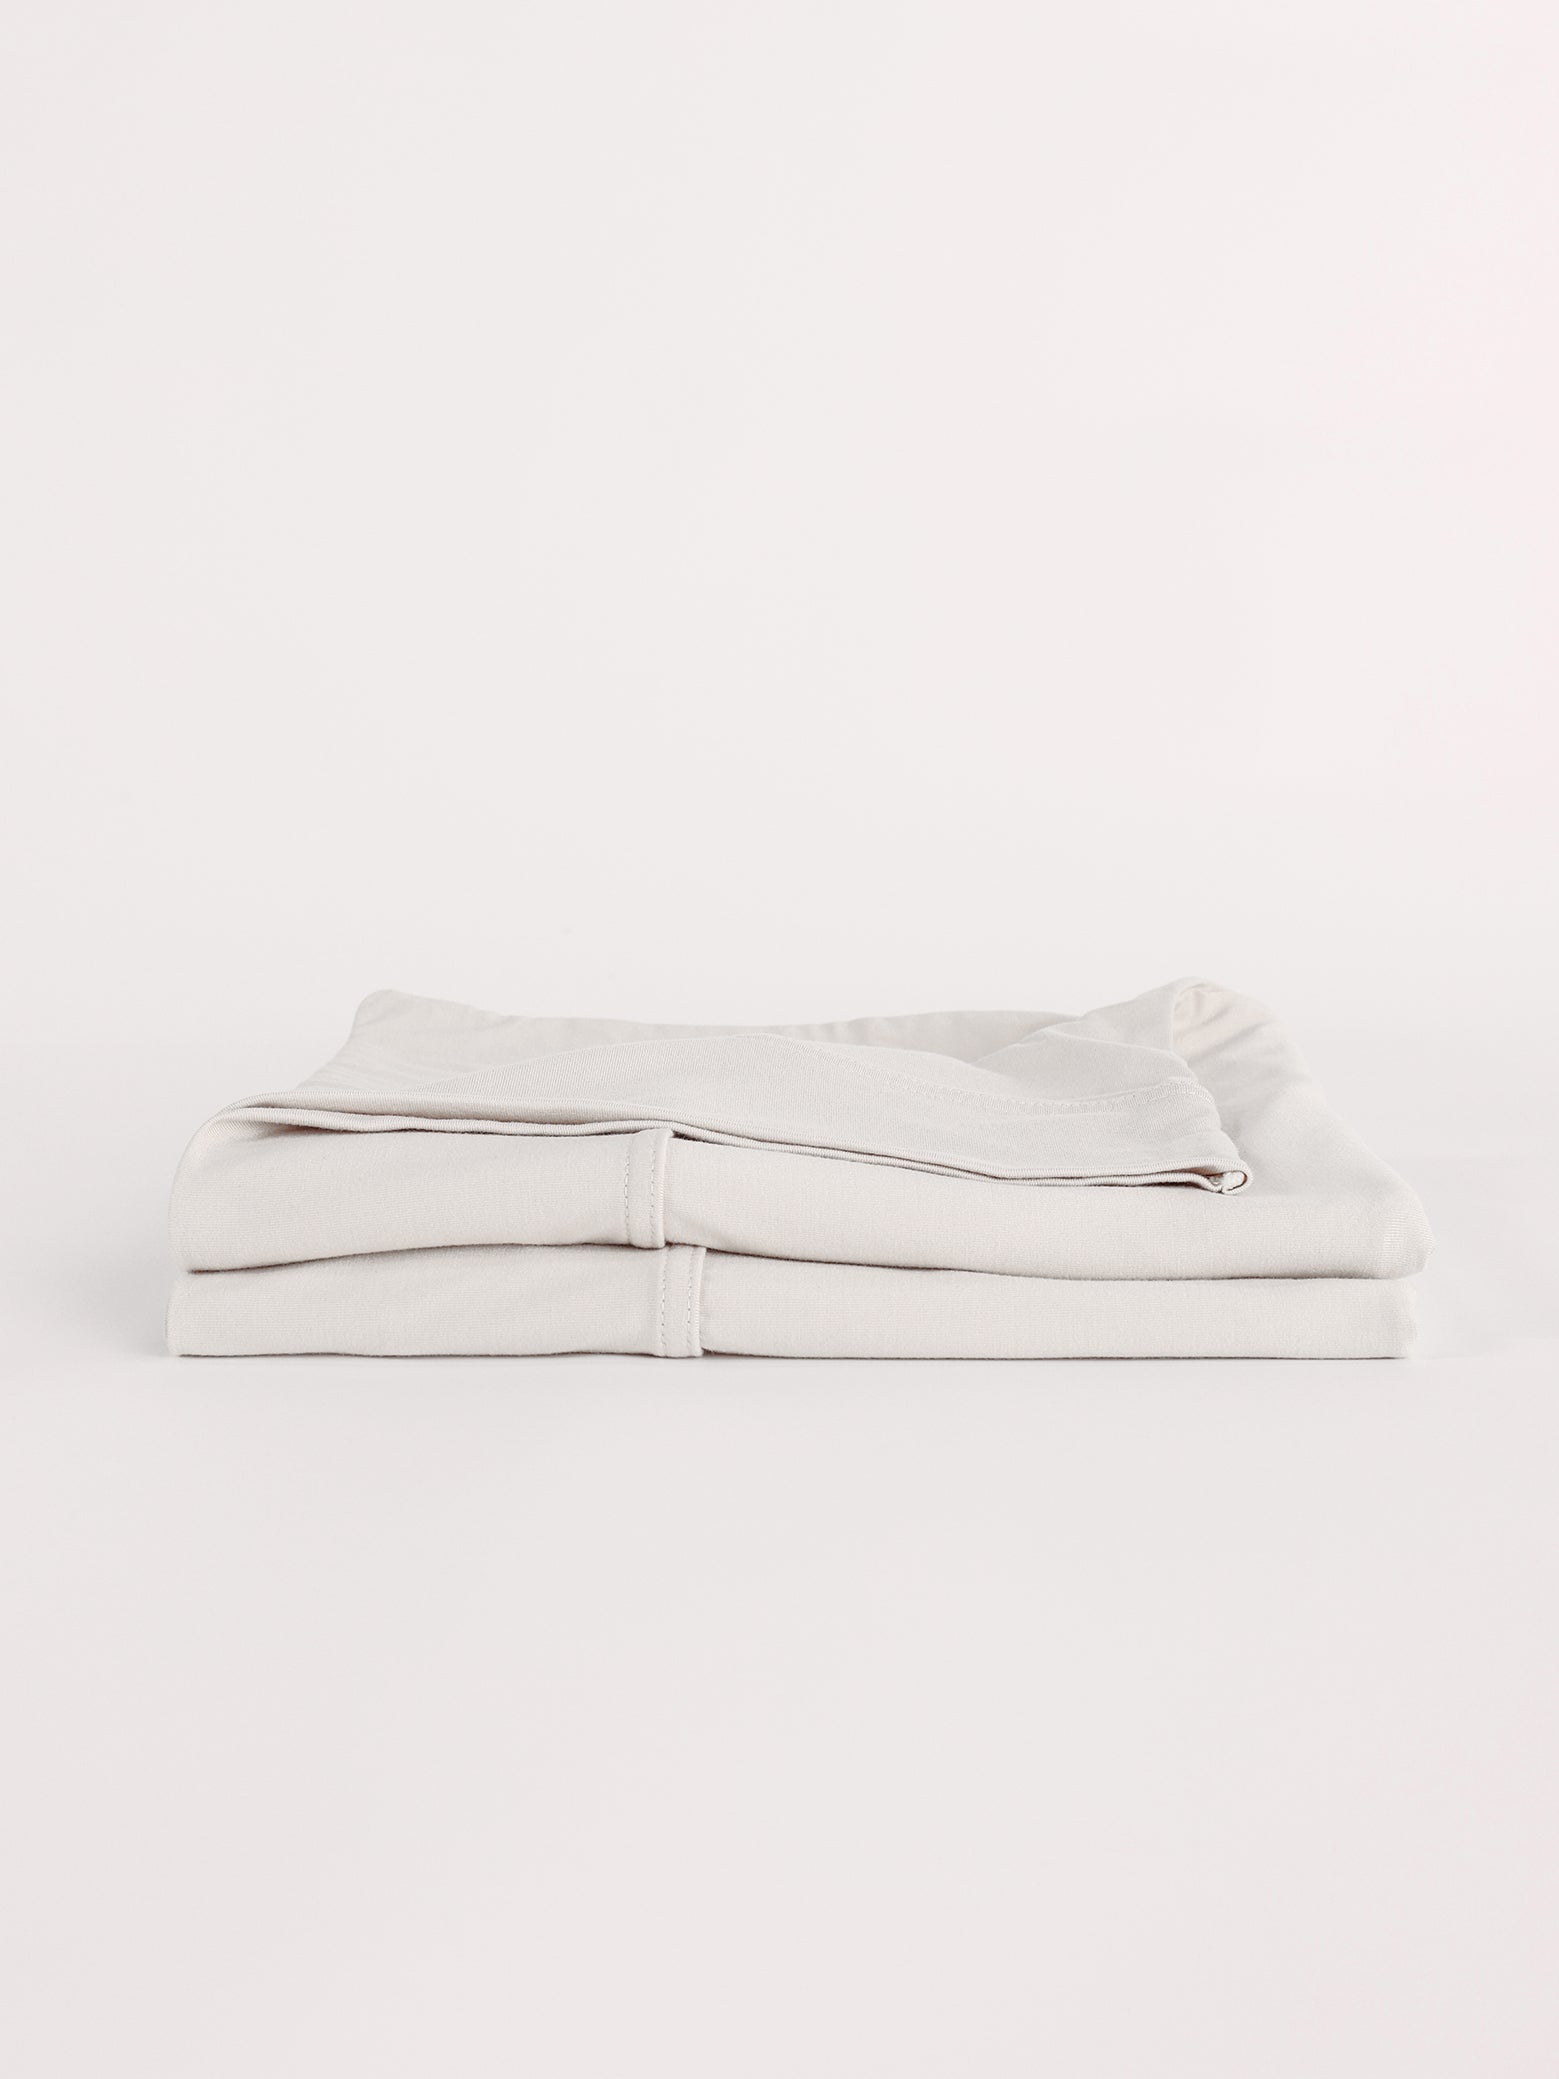 Light grey pillowcases folded with white background |Color:Light Grey